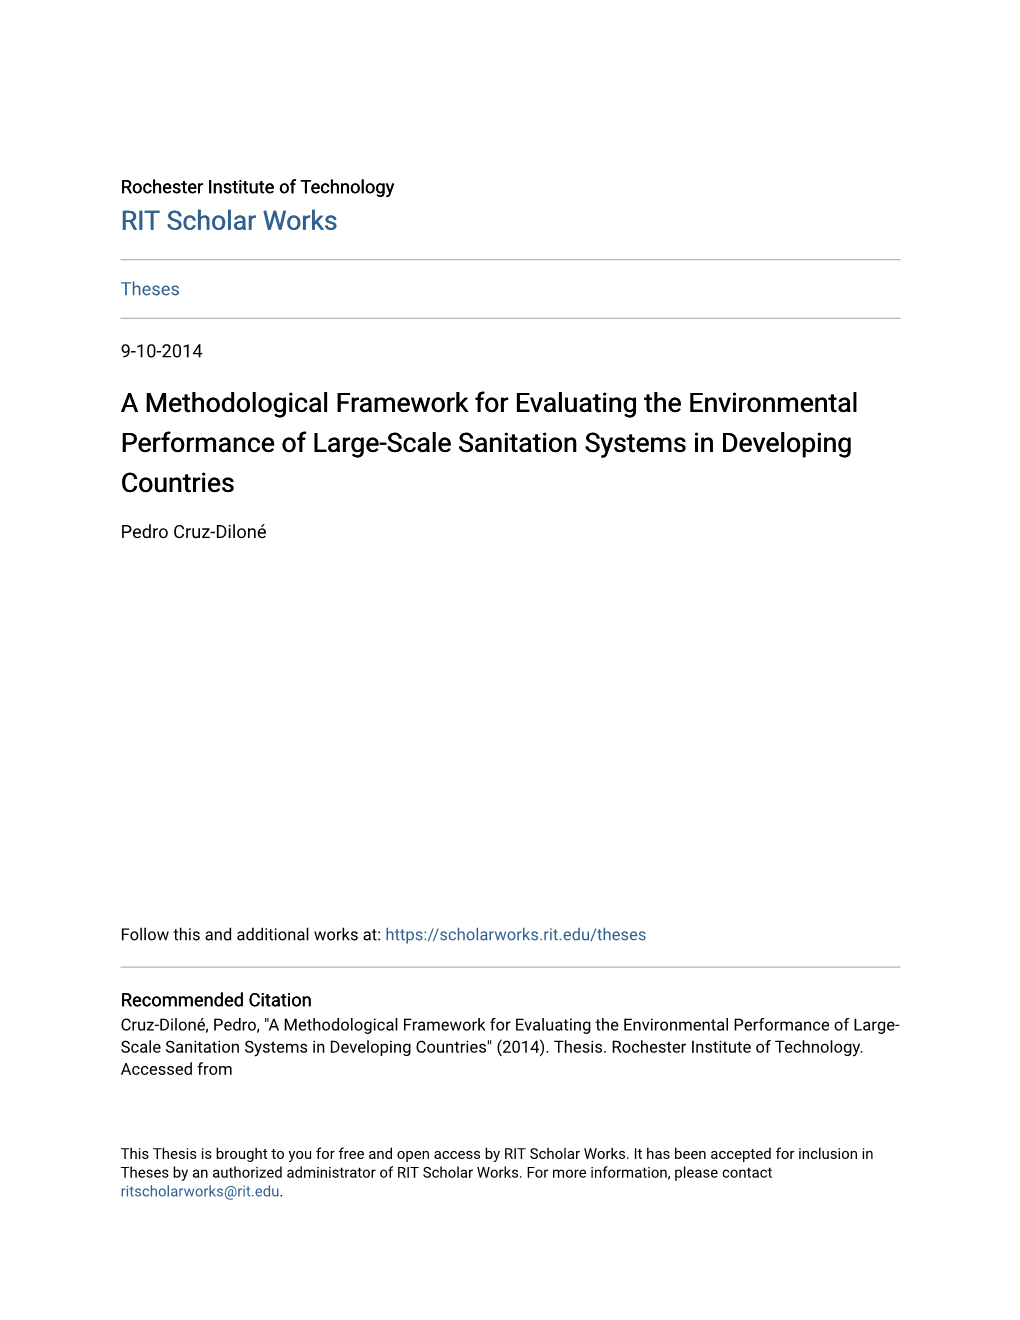 A Methodological Framework for Evaluating the Environmental Performance of Large-Scale Sanitation Systems in Developing Countries